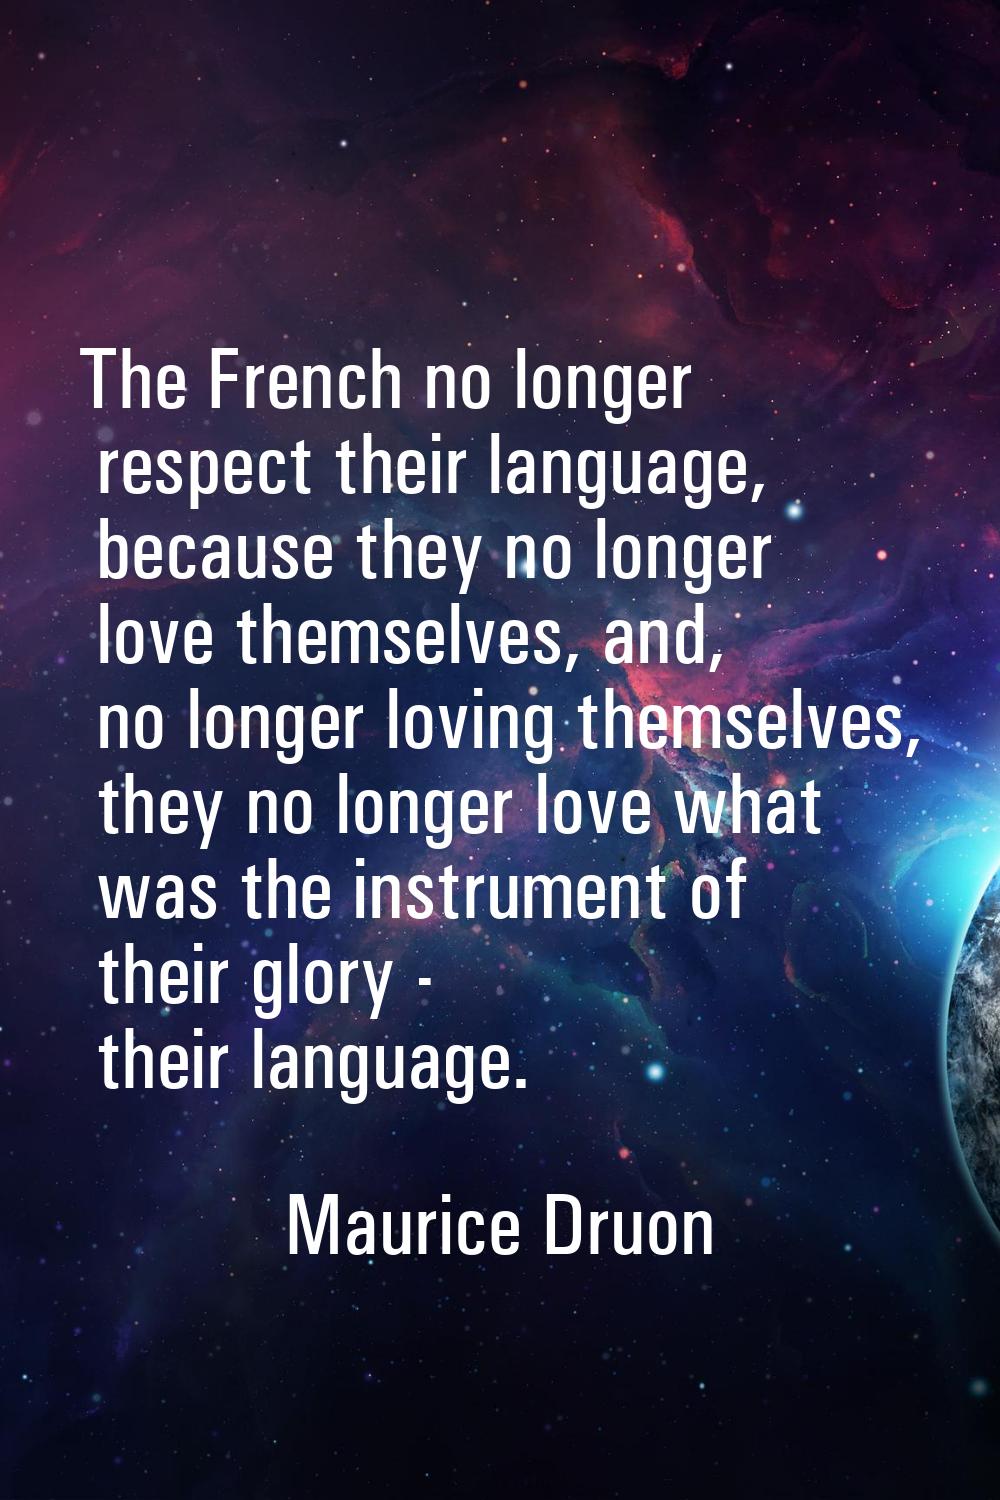 The French no longer respect their language, because they no longer love themselves, and, no longer